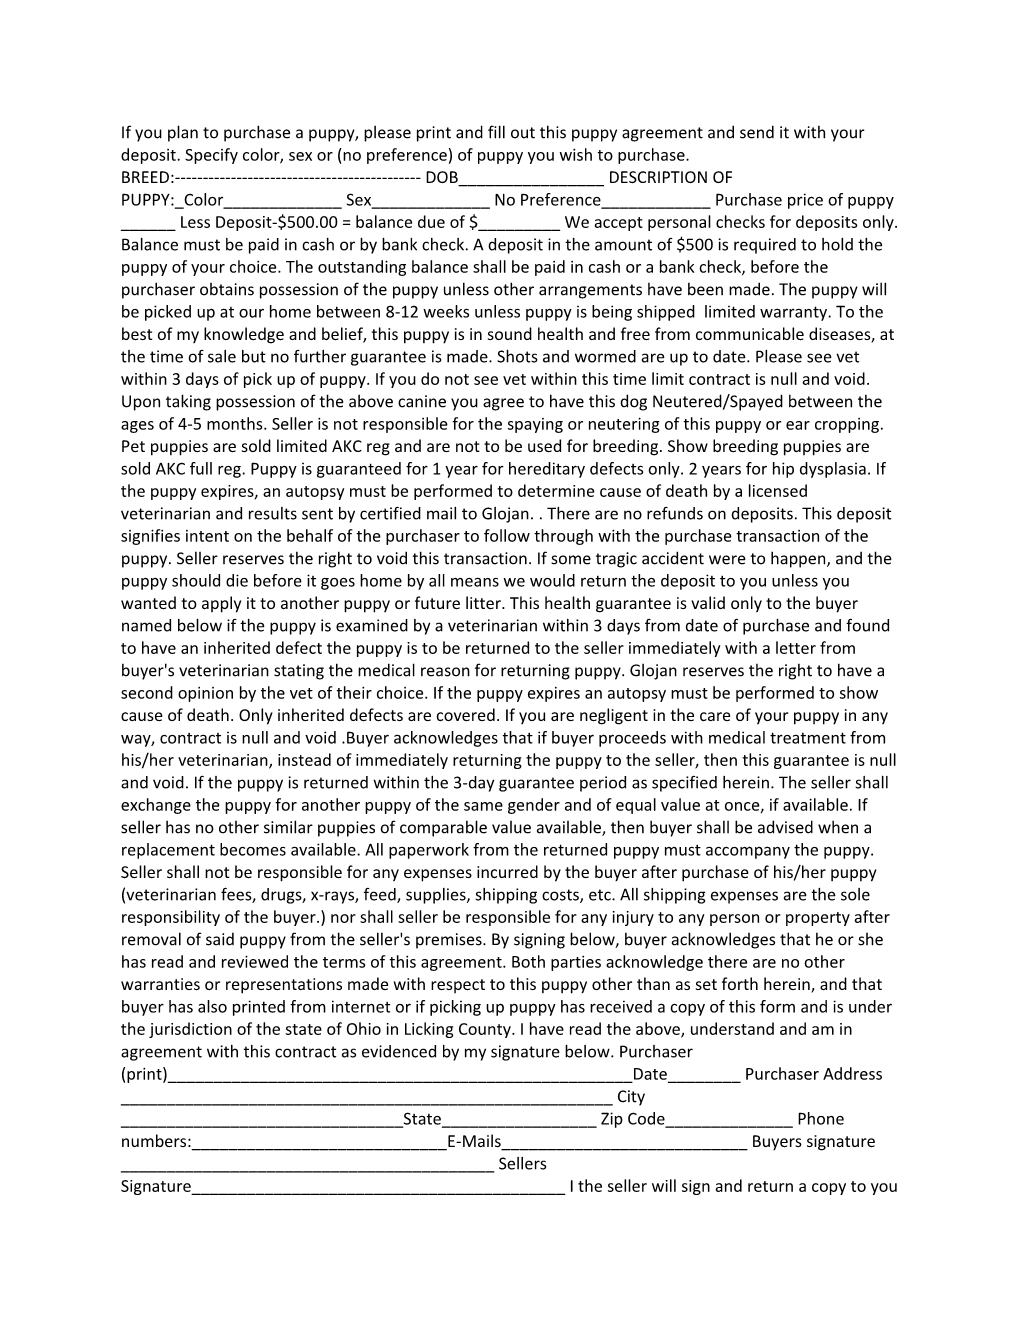 If You Plan to Purchase a Puppy, Please Print and Fill out This Puppy Agreement and Send